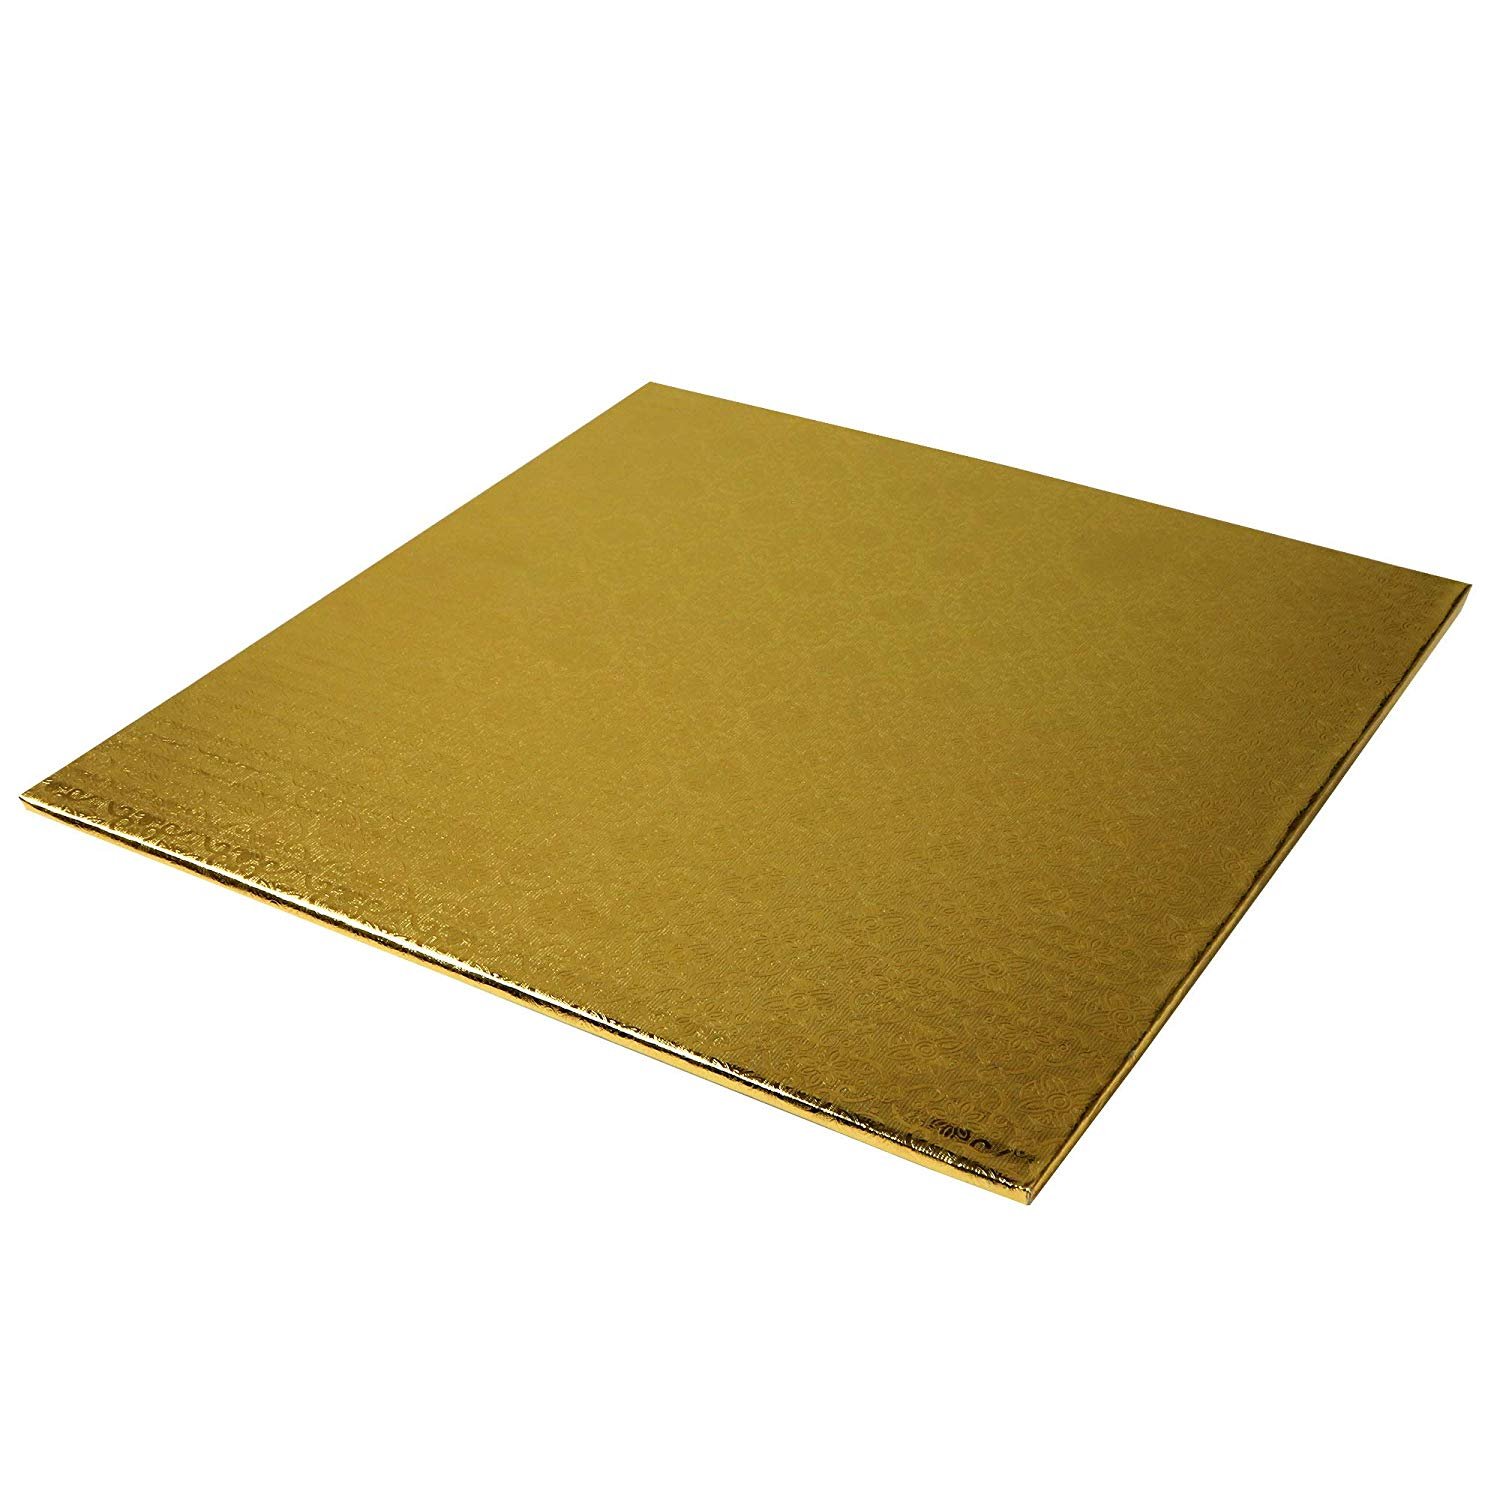 O'Creme Gold Wraparound Square Cake Pastry Drum Board 1/4 Inch Thick, 12 Inch x 12 Inch - Pack of 10 - image 5 of 6